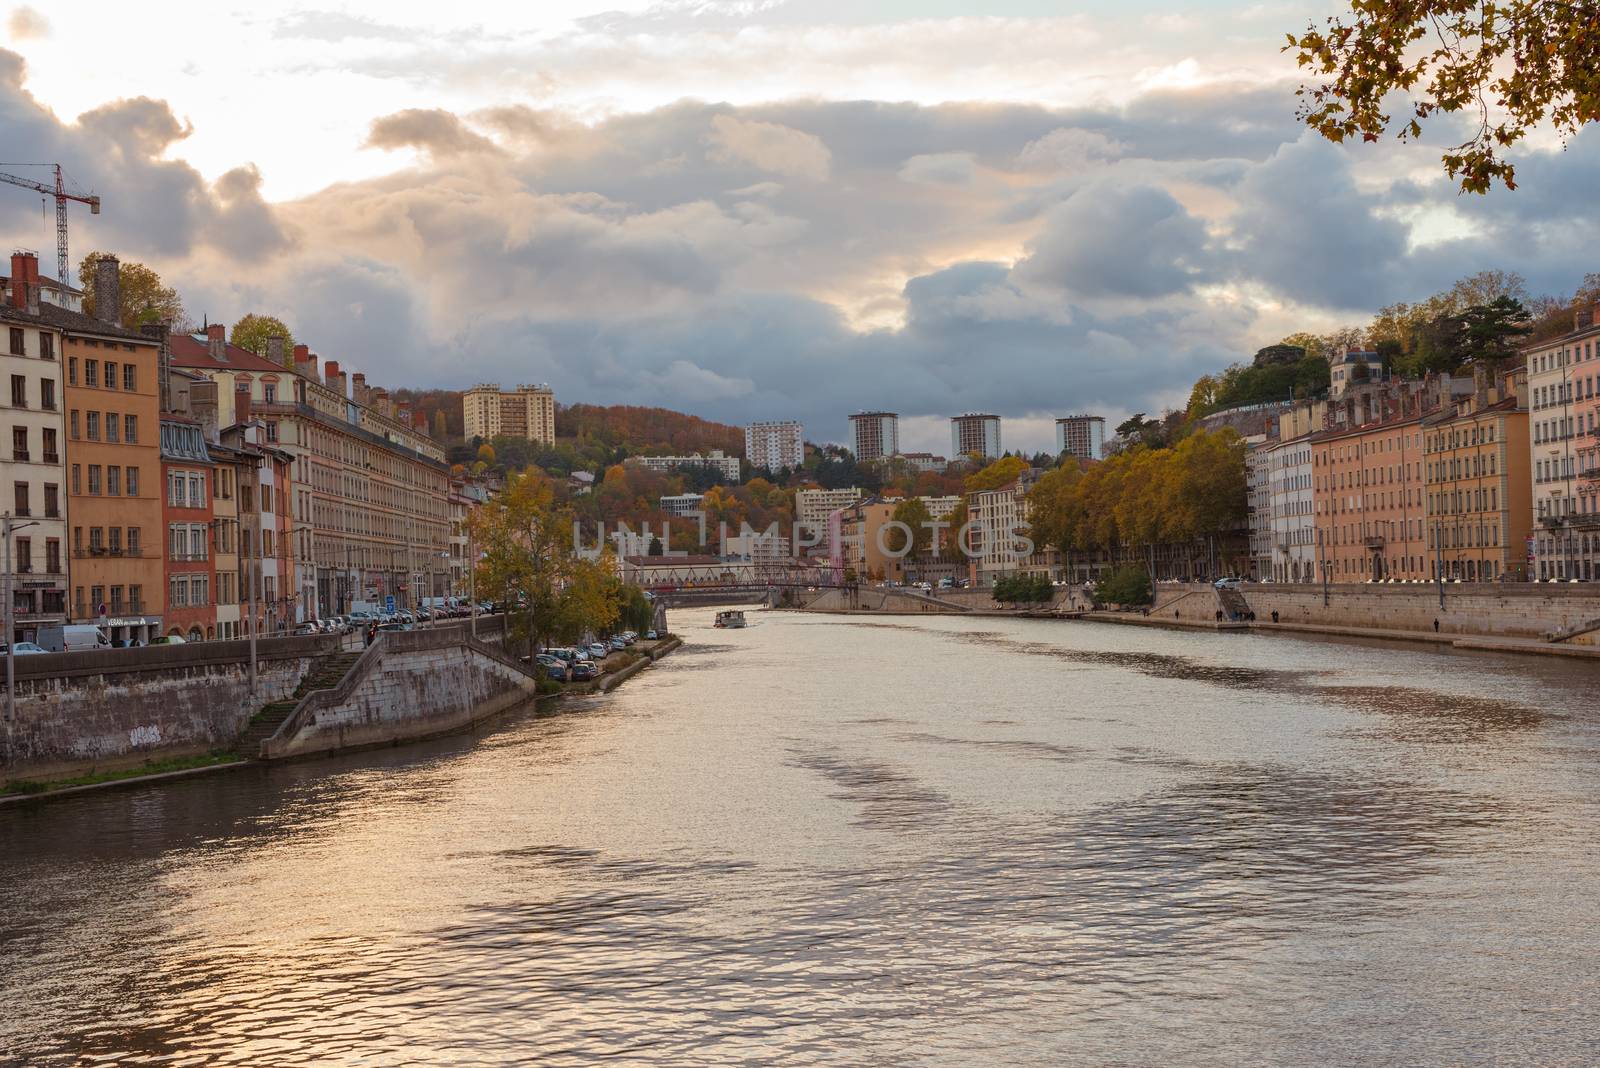 Looking down the Saone River in Lyon, France, at dusk.